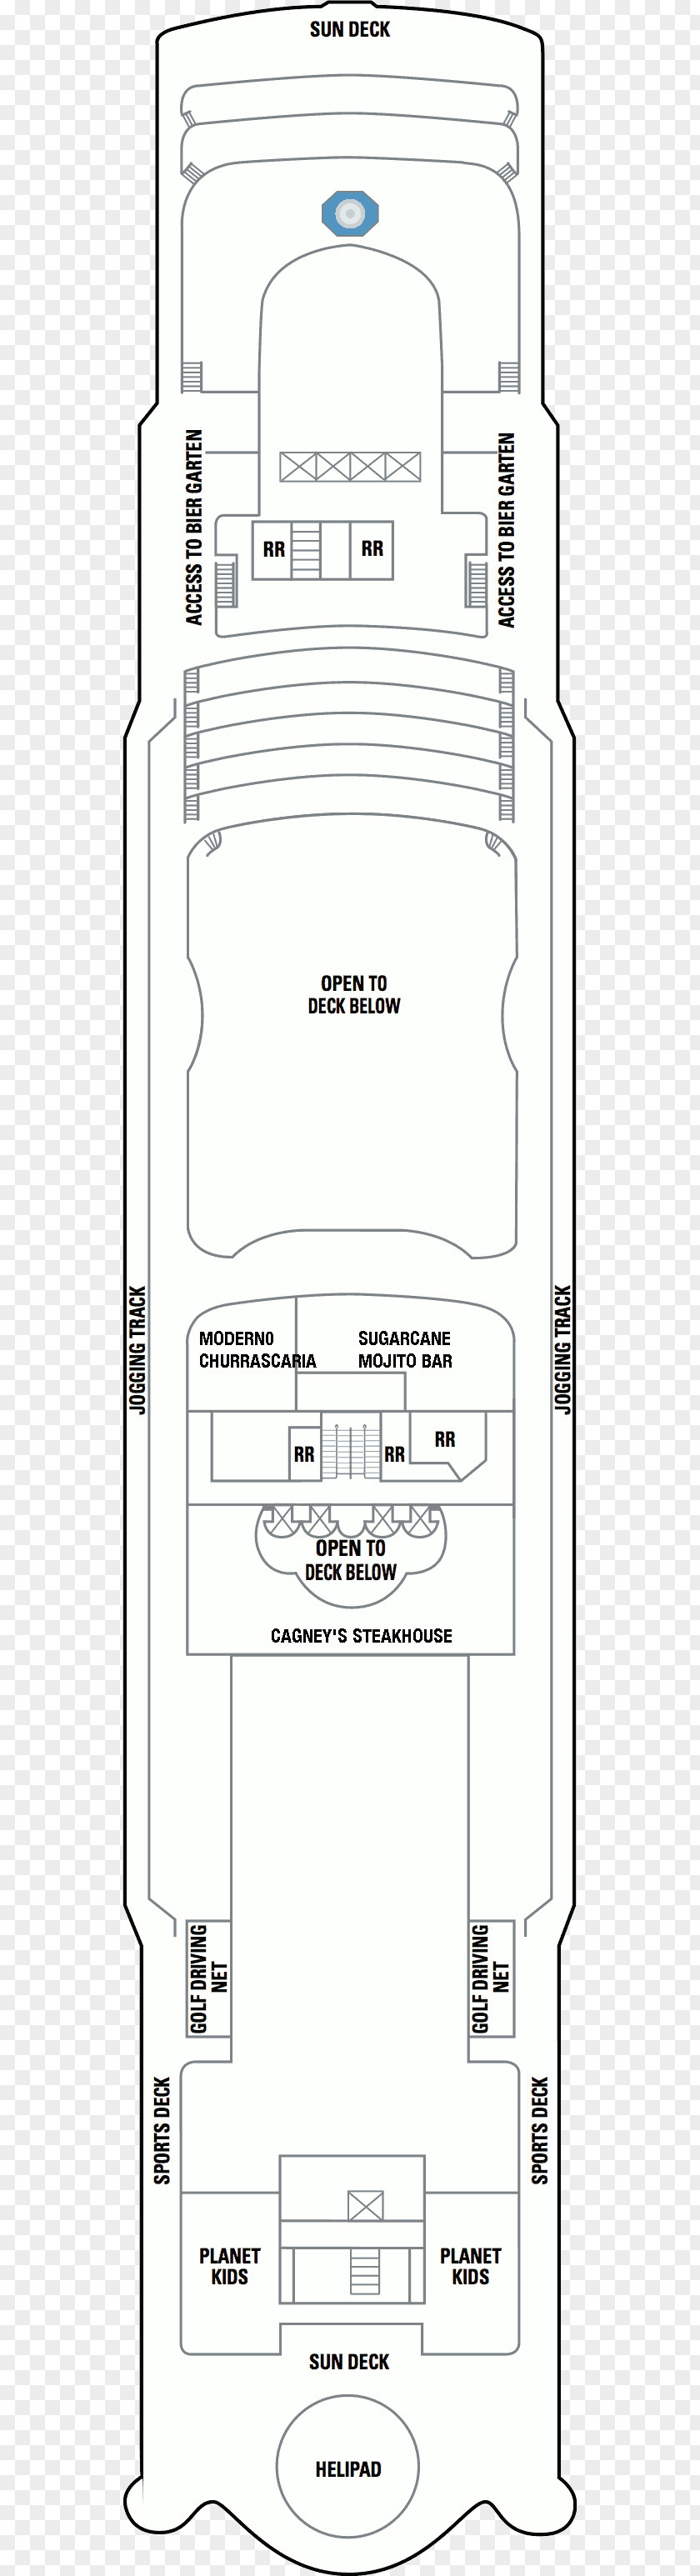 Ship Deck Floor Plan Cruise Celebrity Silhouette PNG